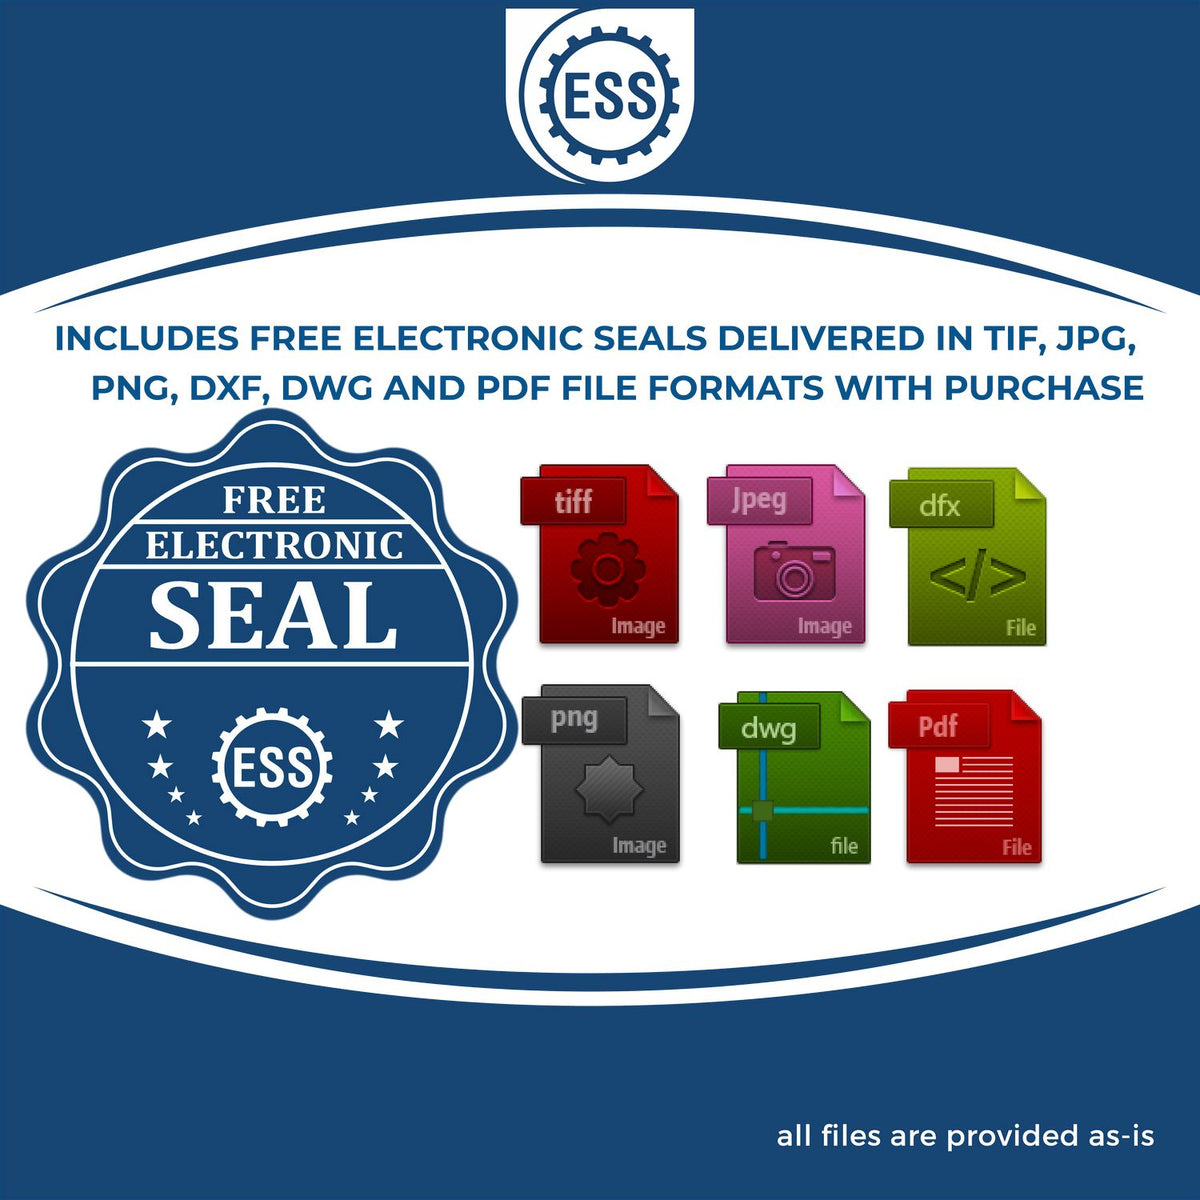 An infographic for the free electronic seal for the State of Indiana Extended Long Reach Engineer Seal illustrating the different file type icons such as DXF, DWG, TIF, JPG and PNG.